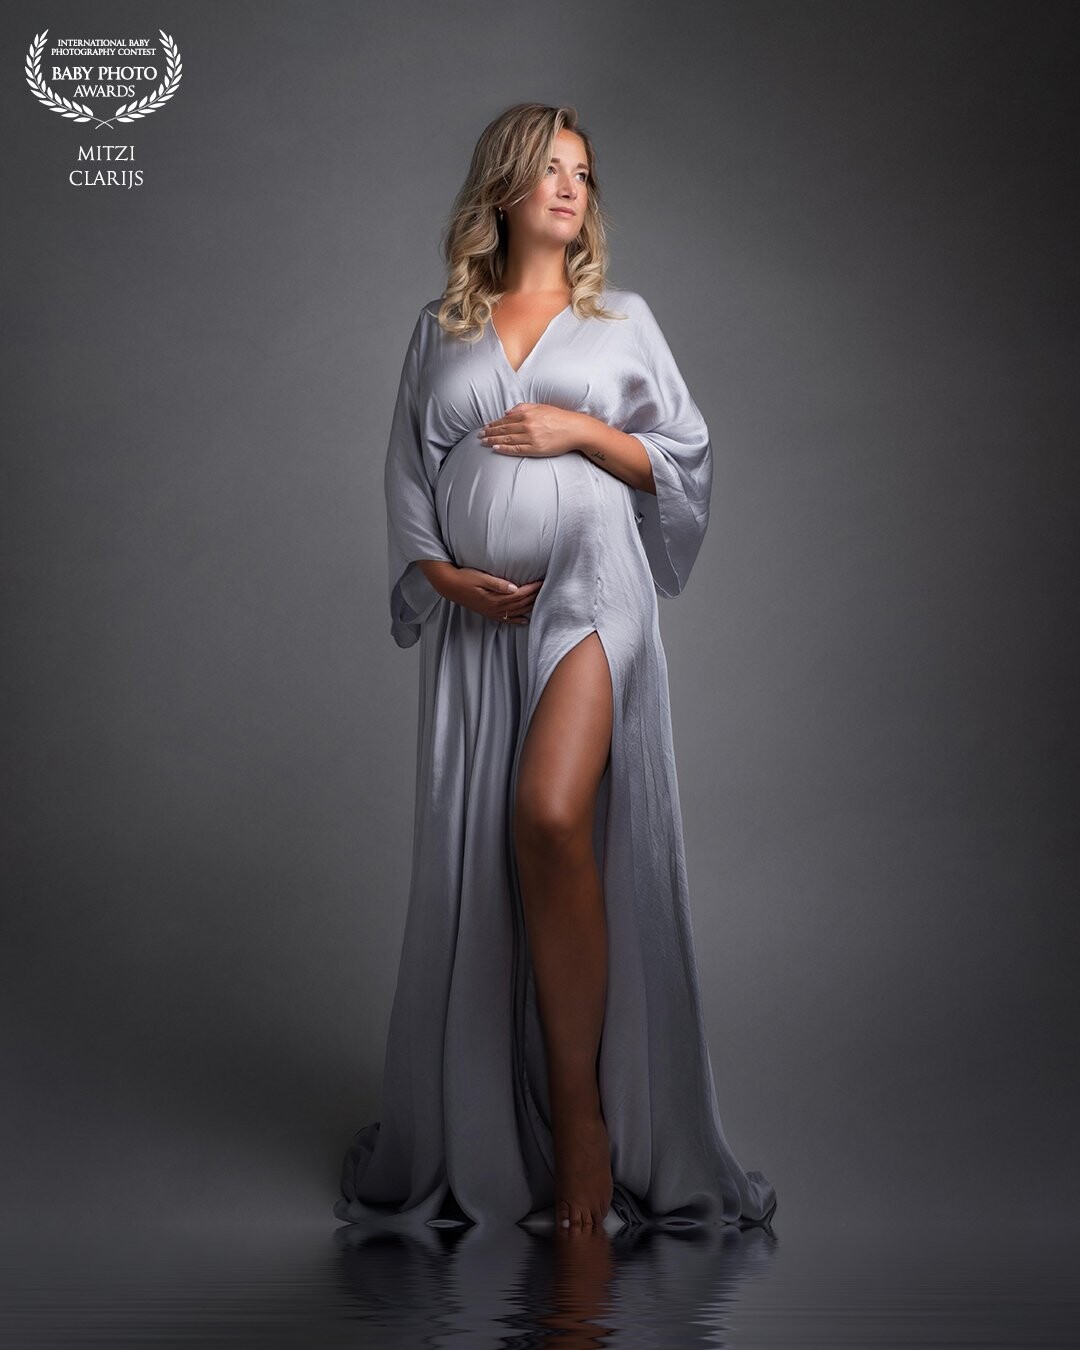 What a beautiful mom!<br />
I think it's really amazing that so many ladies want to have their pregnancy captured to remember this special time in their lives.